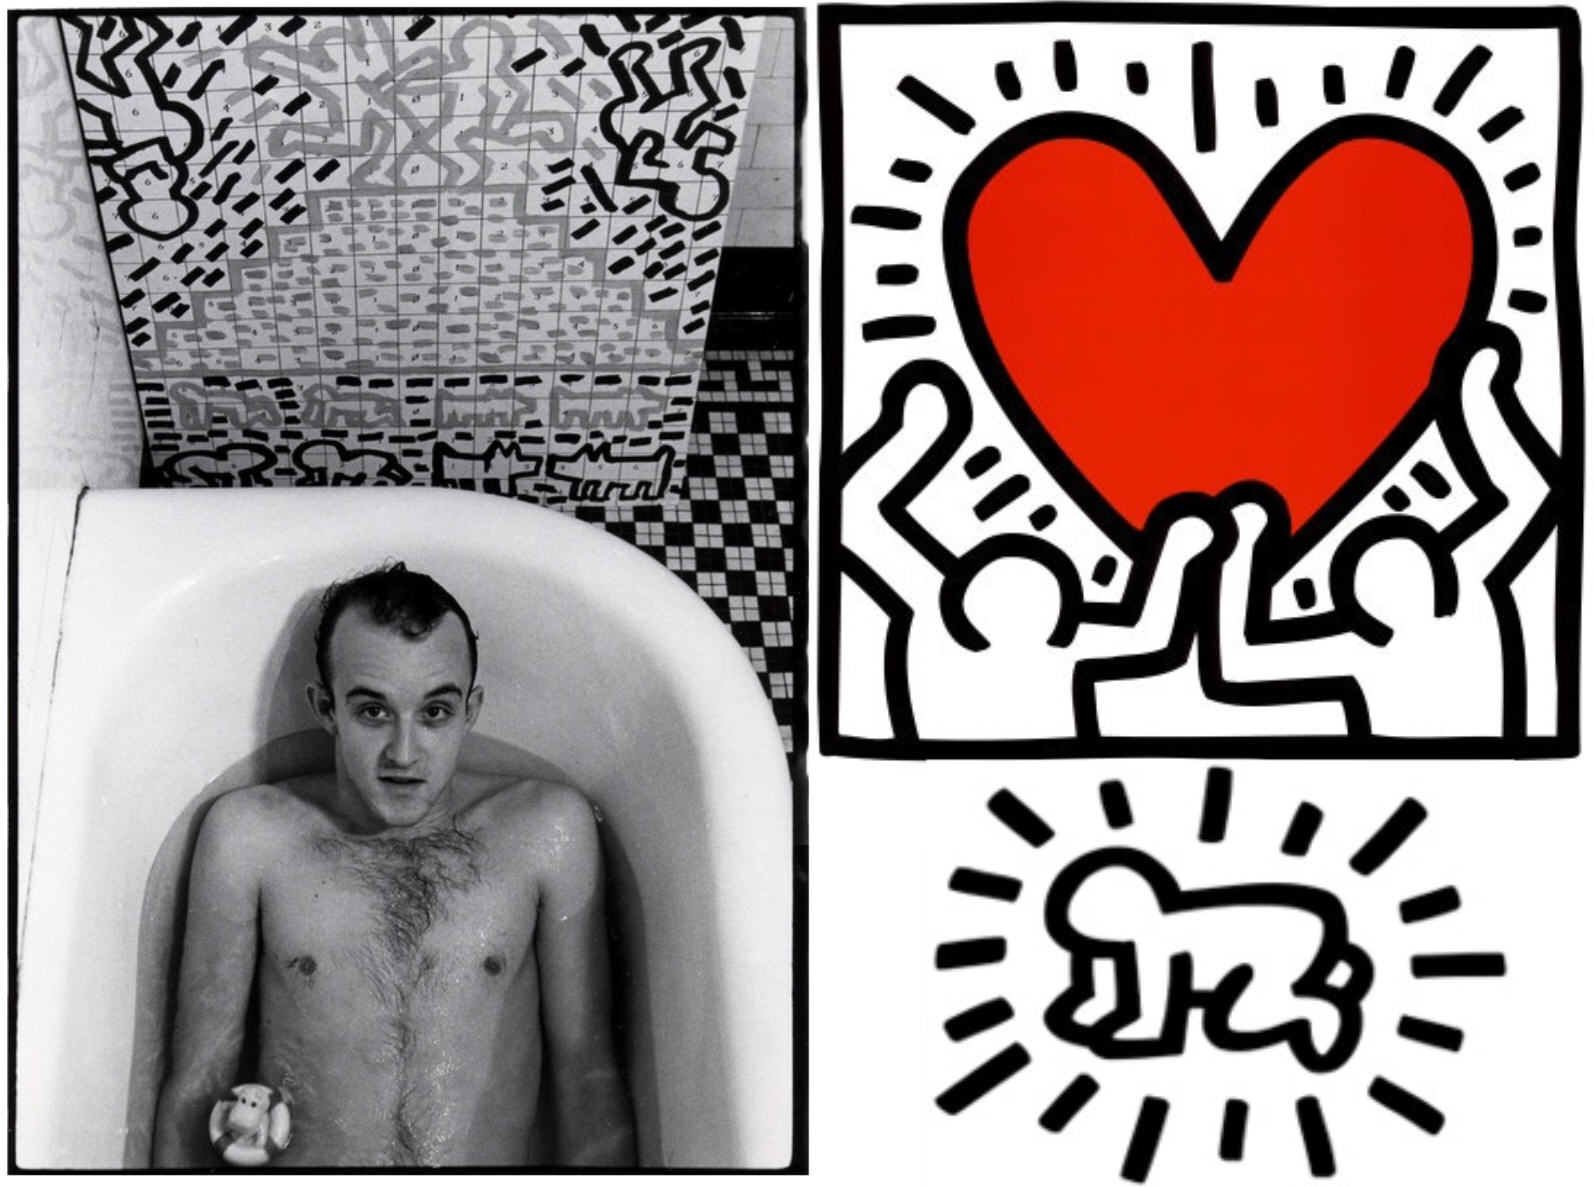 Brief about Keith Haring.